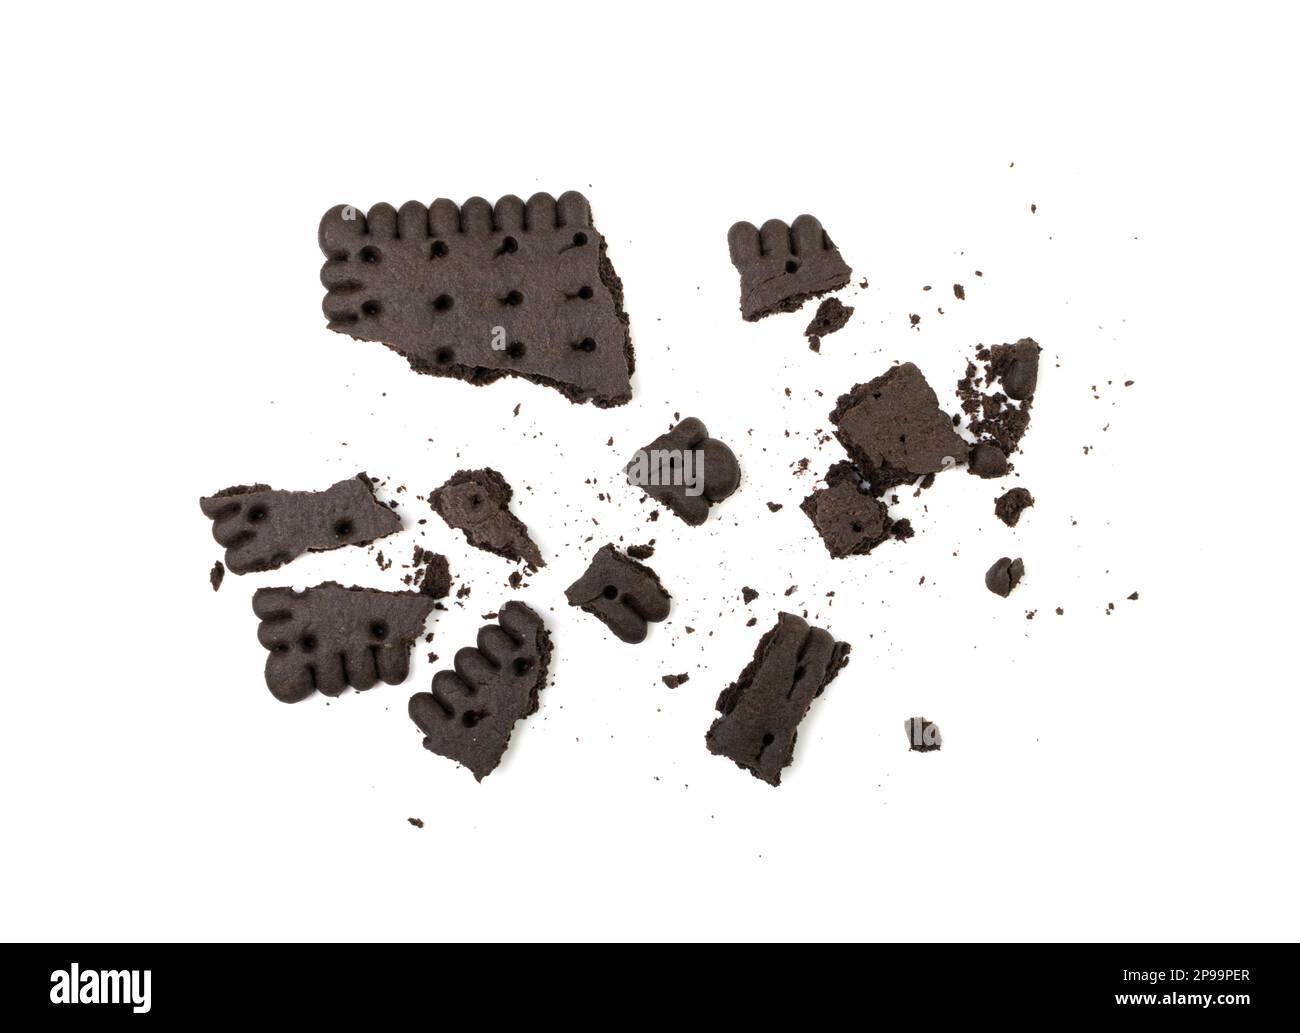 Broken Chocolate Biscuit Isolated, Black Crumbled Cookie, Dark Biscuit Pieces, Square Butter Cookies Bites, Fresh Sweet Cocoa Cracker Crumbs on White Stock Photo